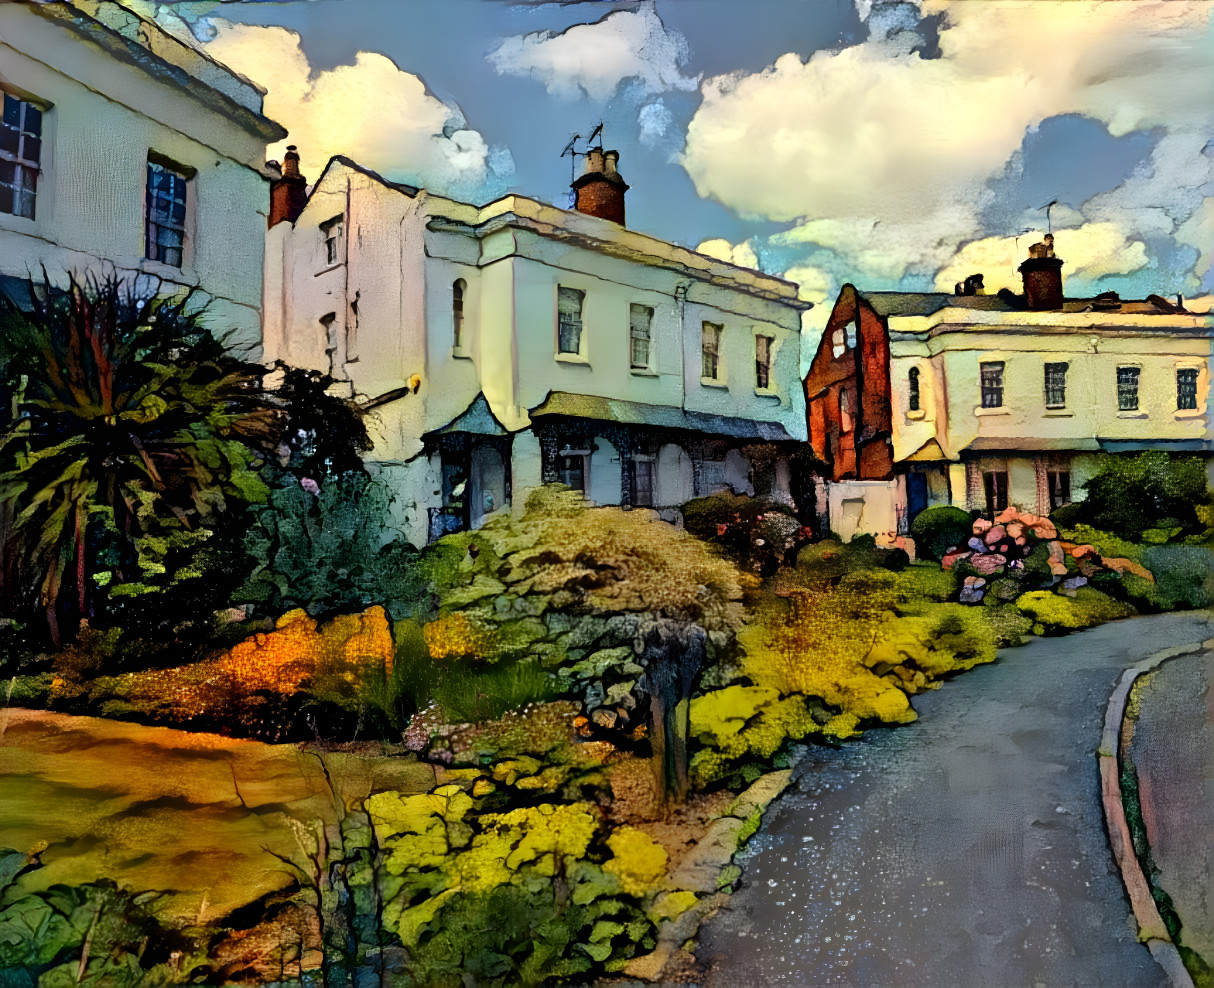 "Cresent In Leamington Spa" - by Unreal.